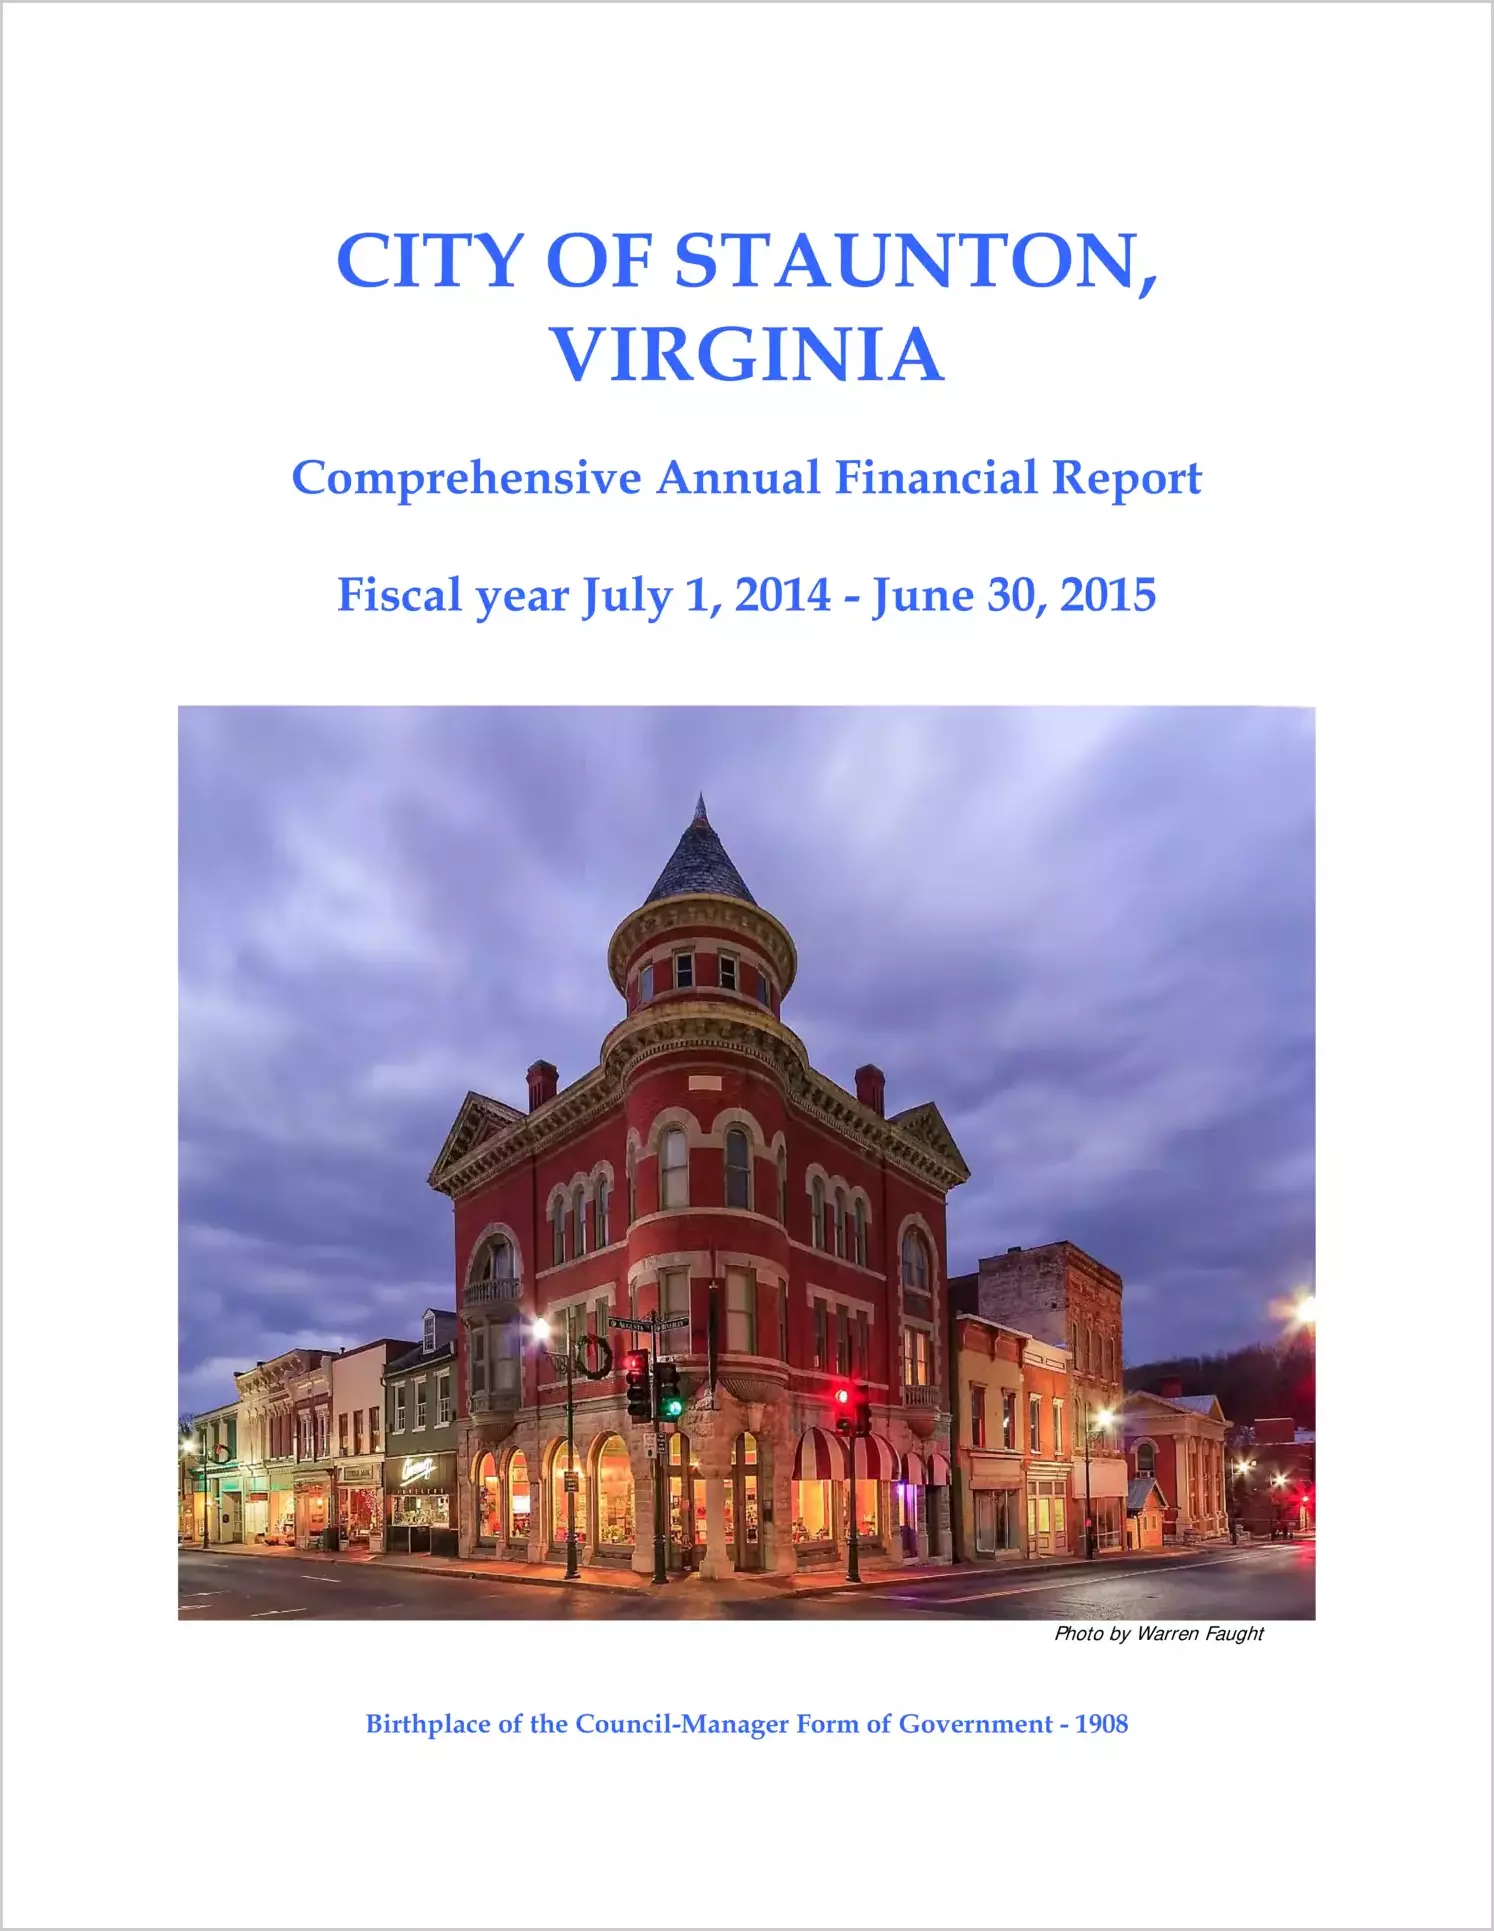 2015 Annual Financial Report for City of Staunton